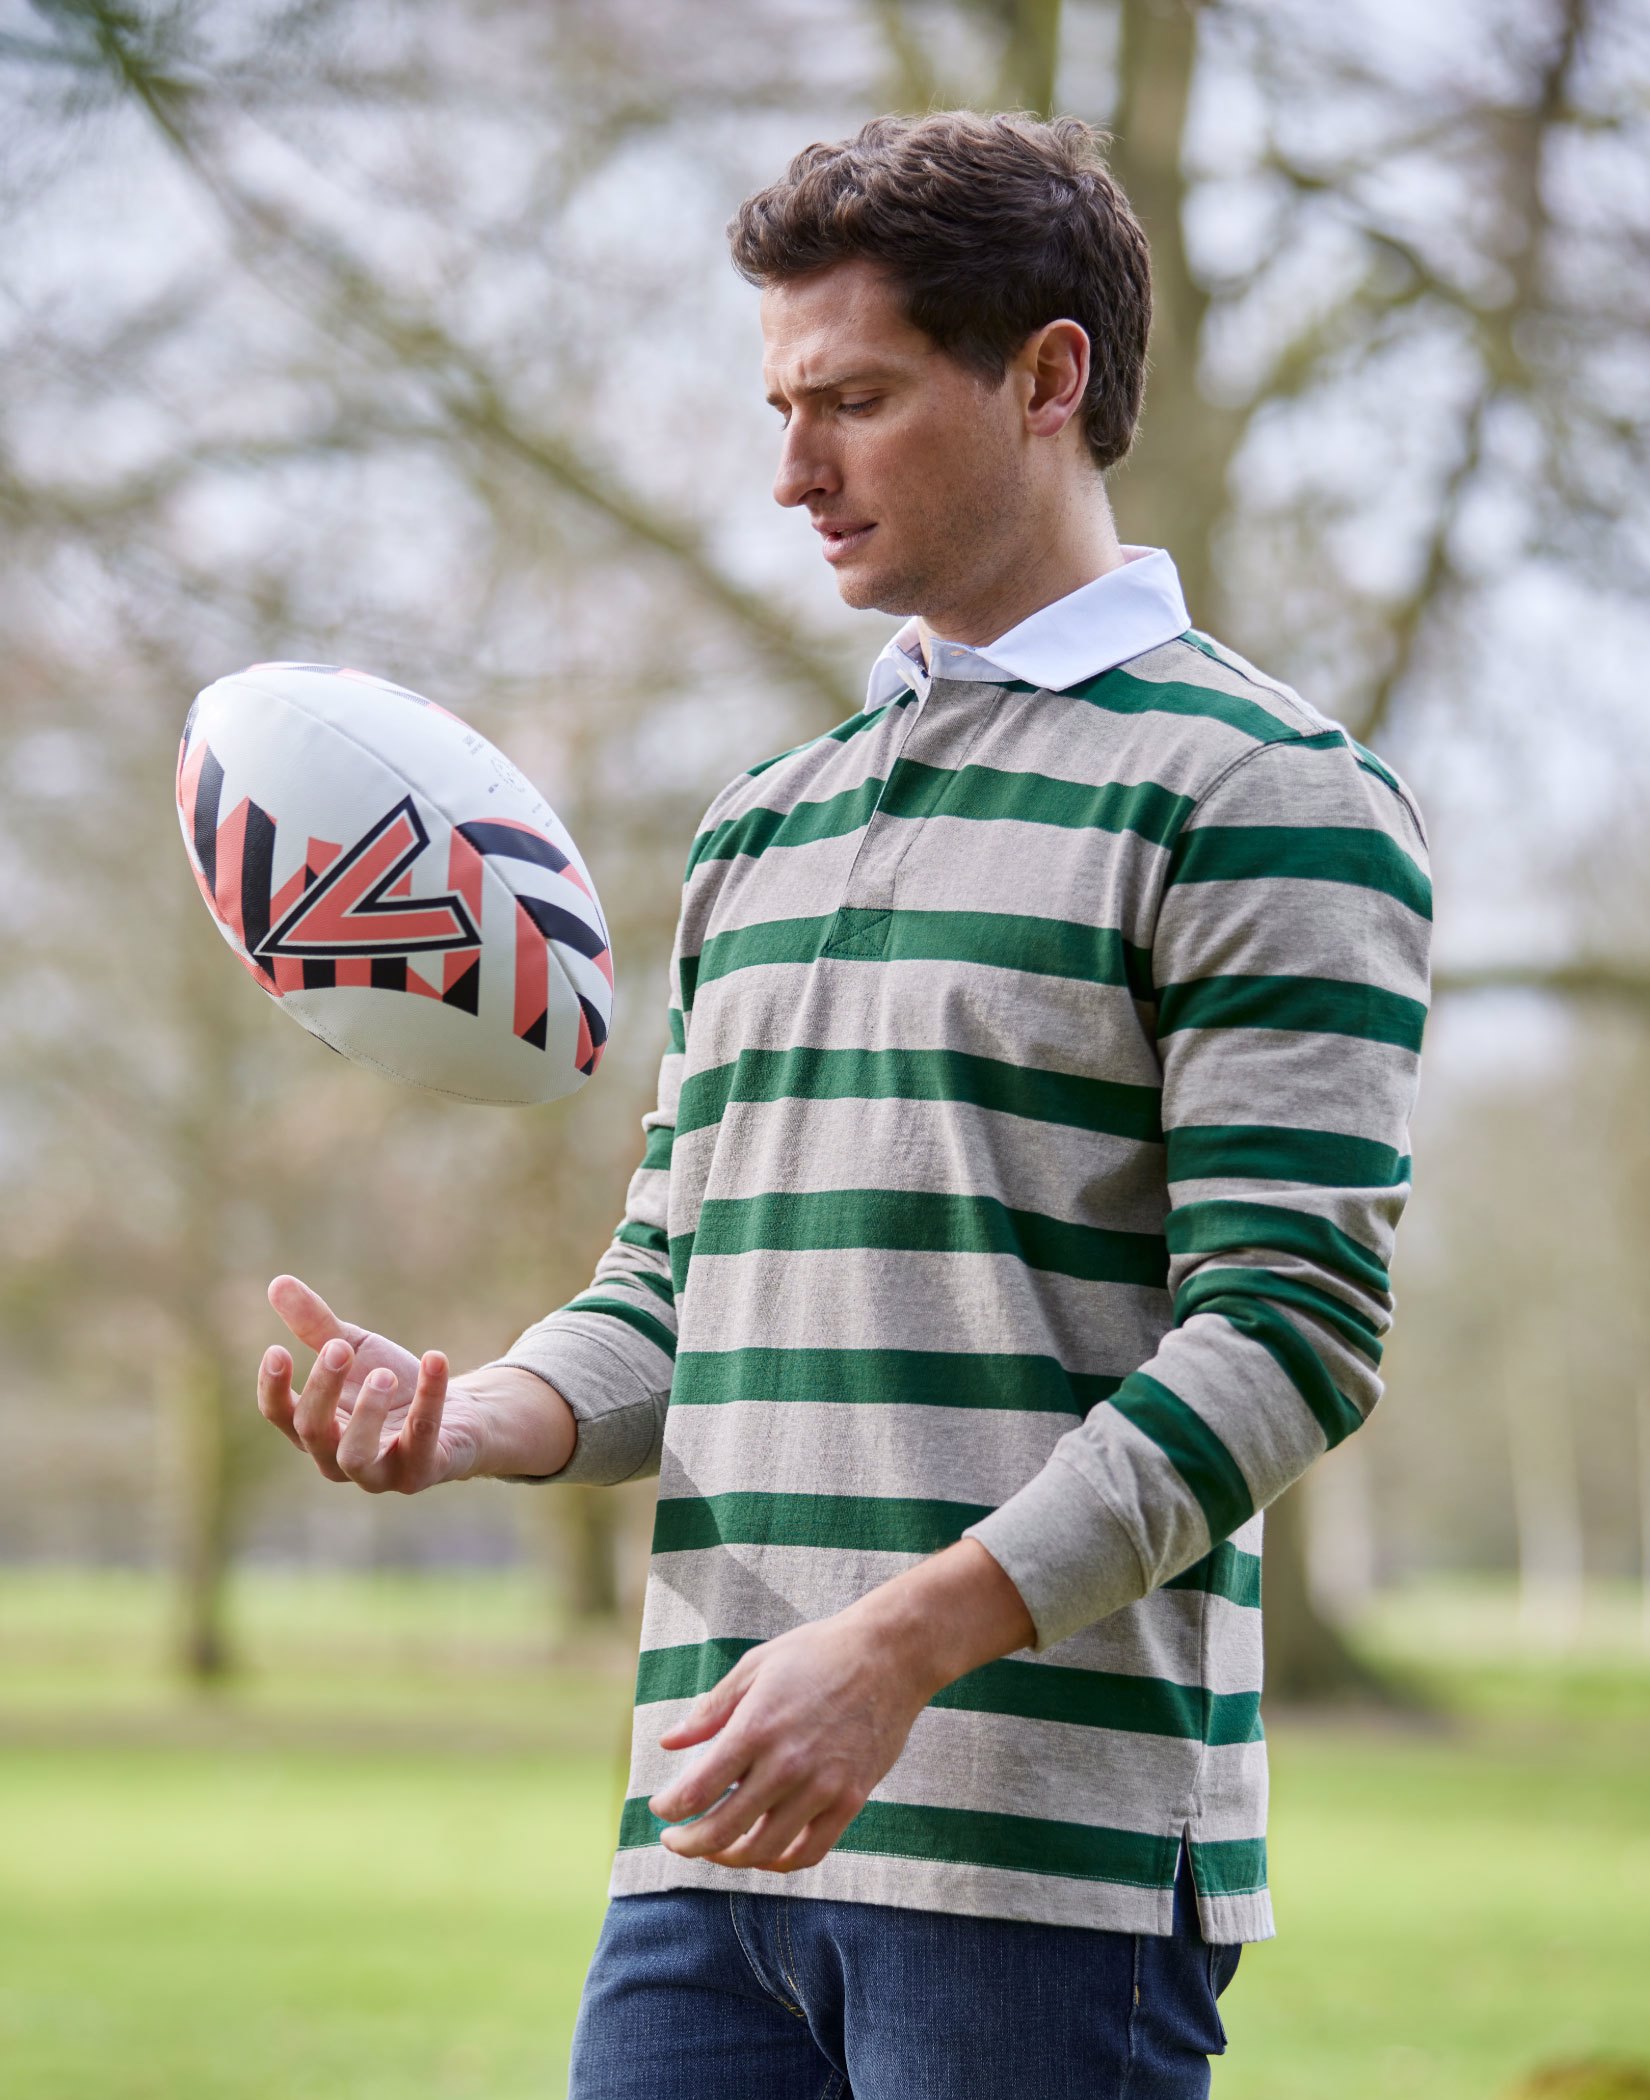 Polo Ralph Lauren The Iconic Rugby Shirt Striped Polo Shirt - Farfetch